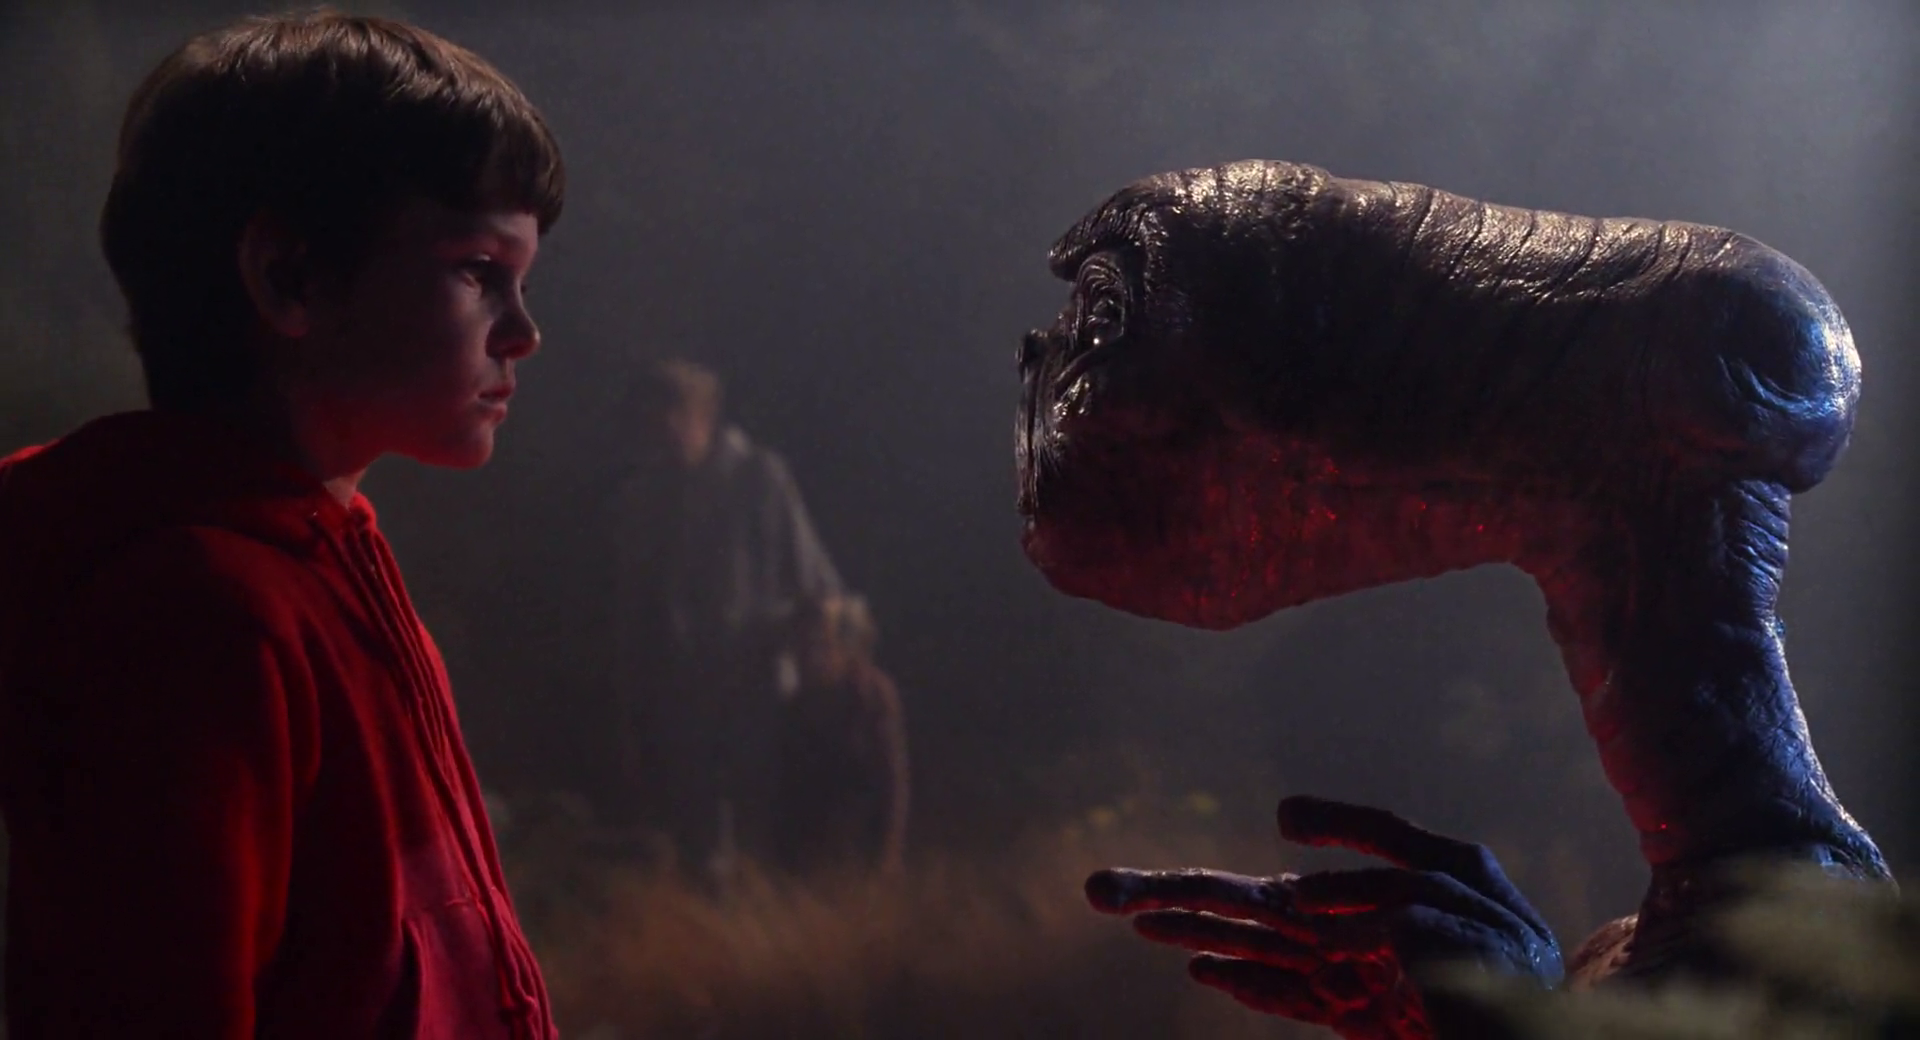 E T The Extra Terrestrial 1982 Dee Wallace 1080p H264 AC 3 DolbyD 5 1 nickarad